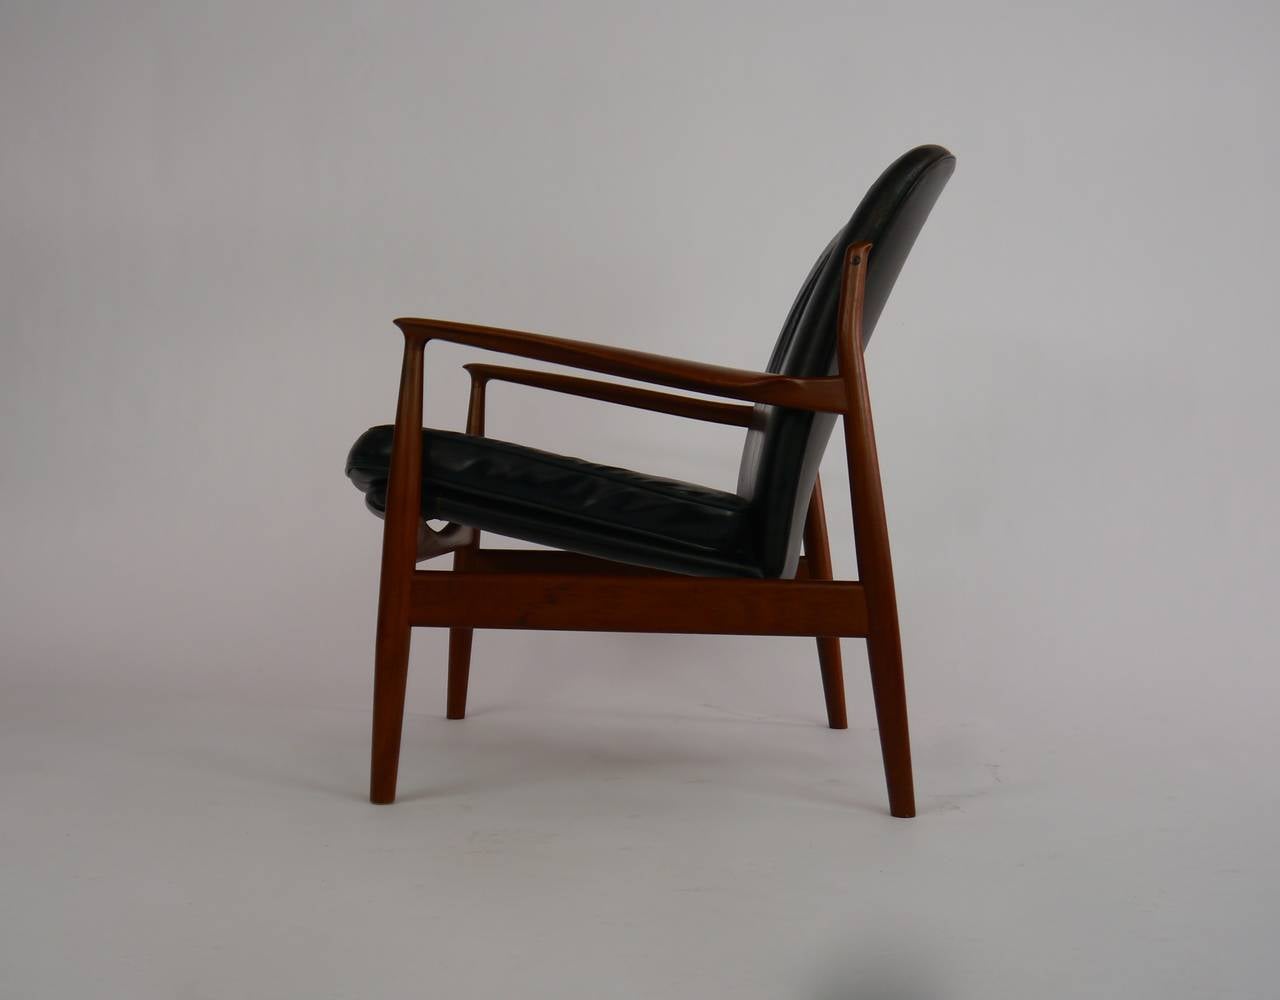 Teak and leather lounge chair by Finn Juhl for France and Daverkosen. This example a rarely seen variant of the more common model 136.